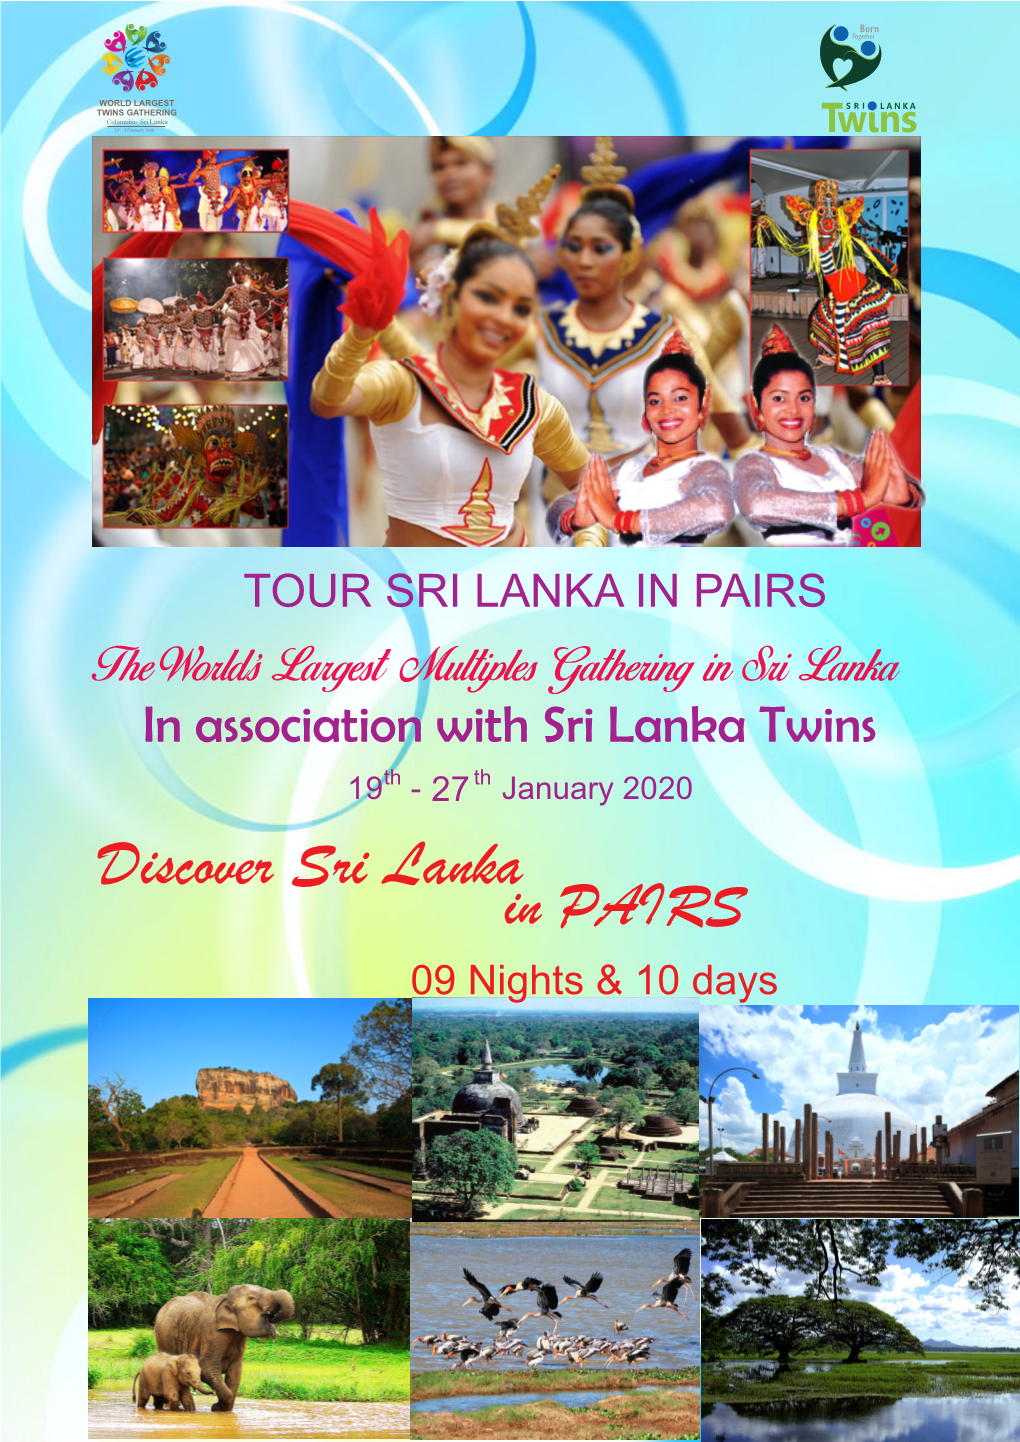 Discover Sri Lanka in PAIRS 09 Nights & 10 Days TWIN DAY FESTIVAL - WORLD's LARGEST MULTIPLES GATHERING in SRI LANKA